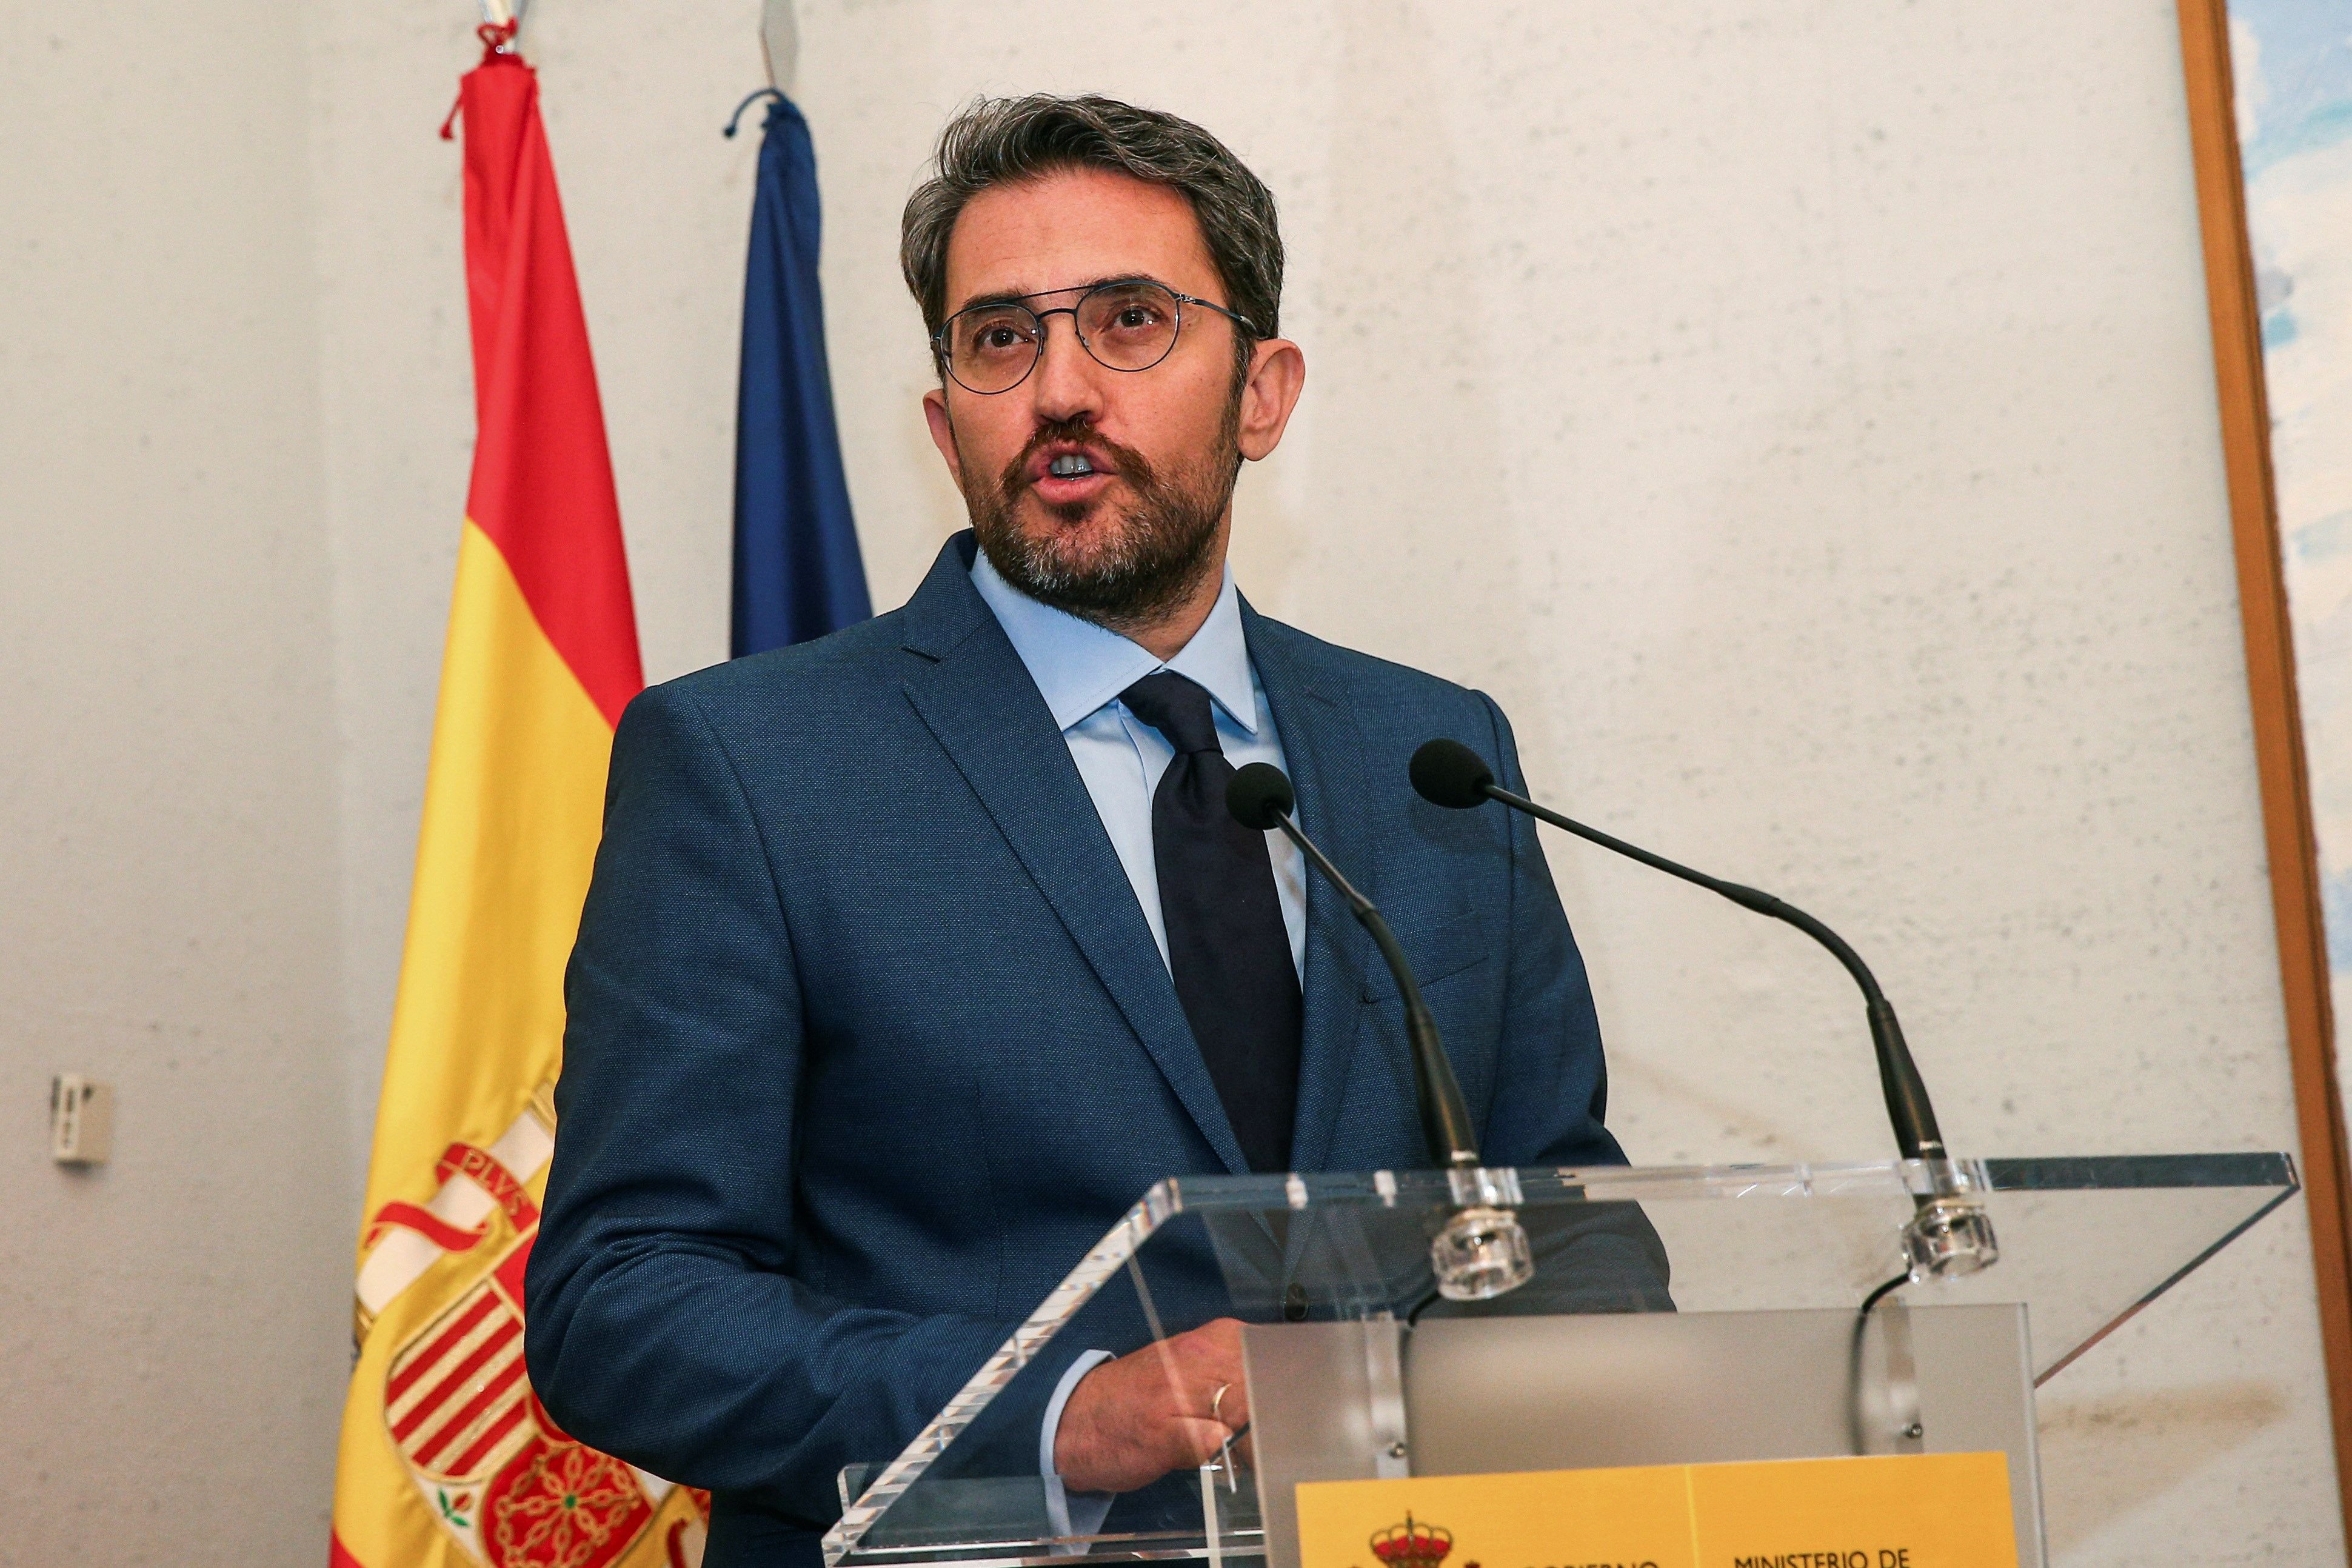 New Spanish minister Màxim Huerta resigns over tax controversy